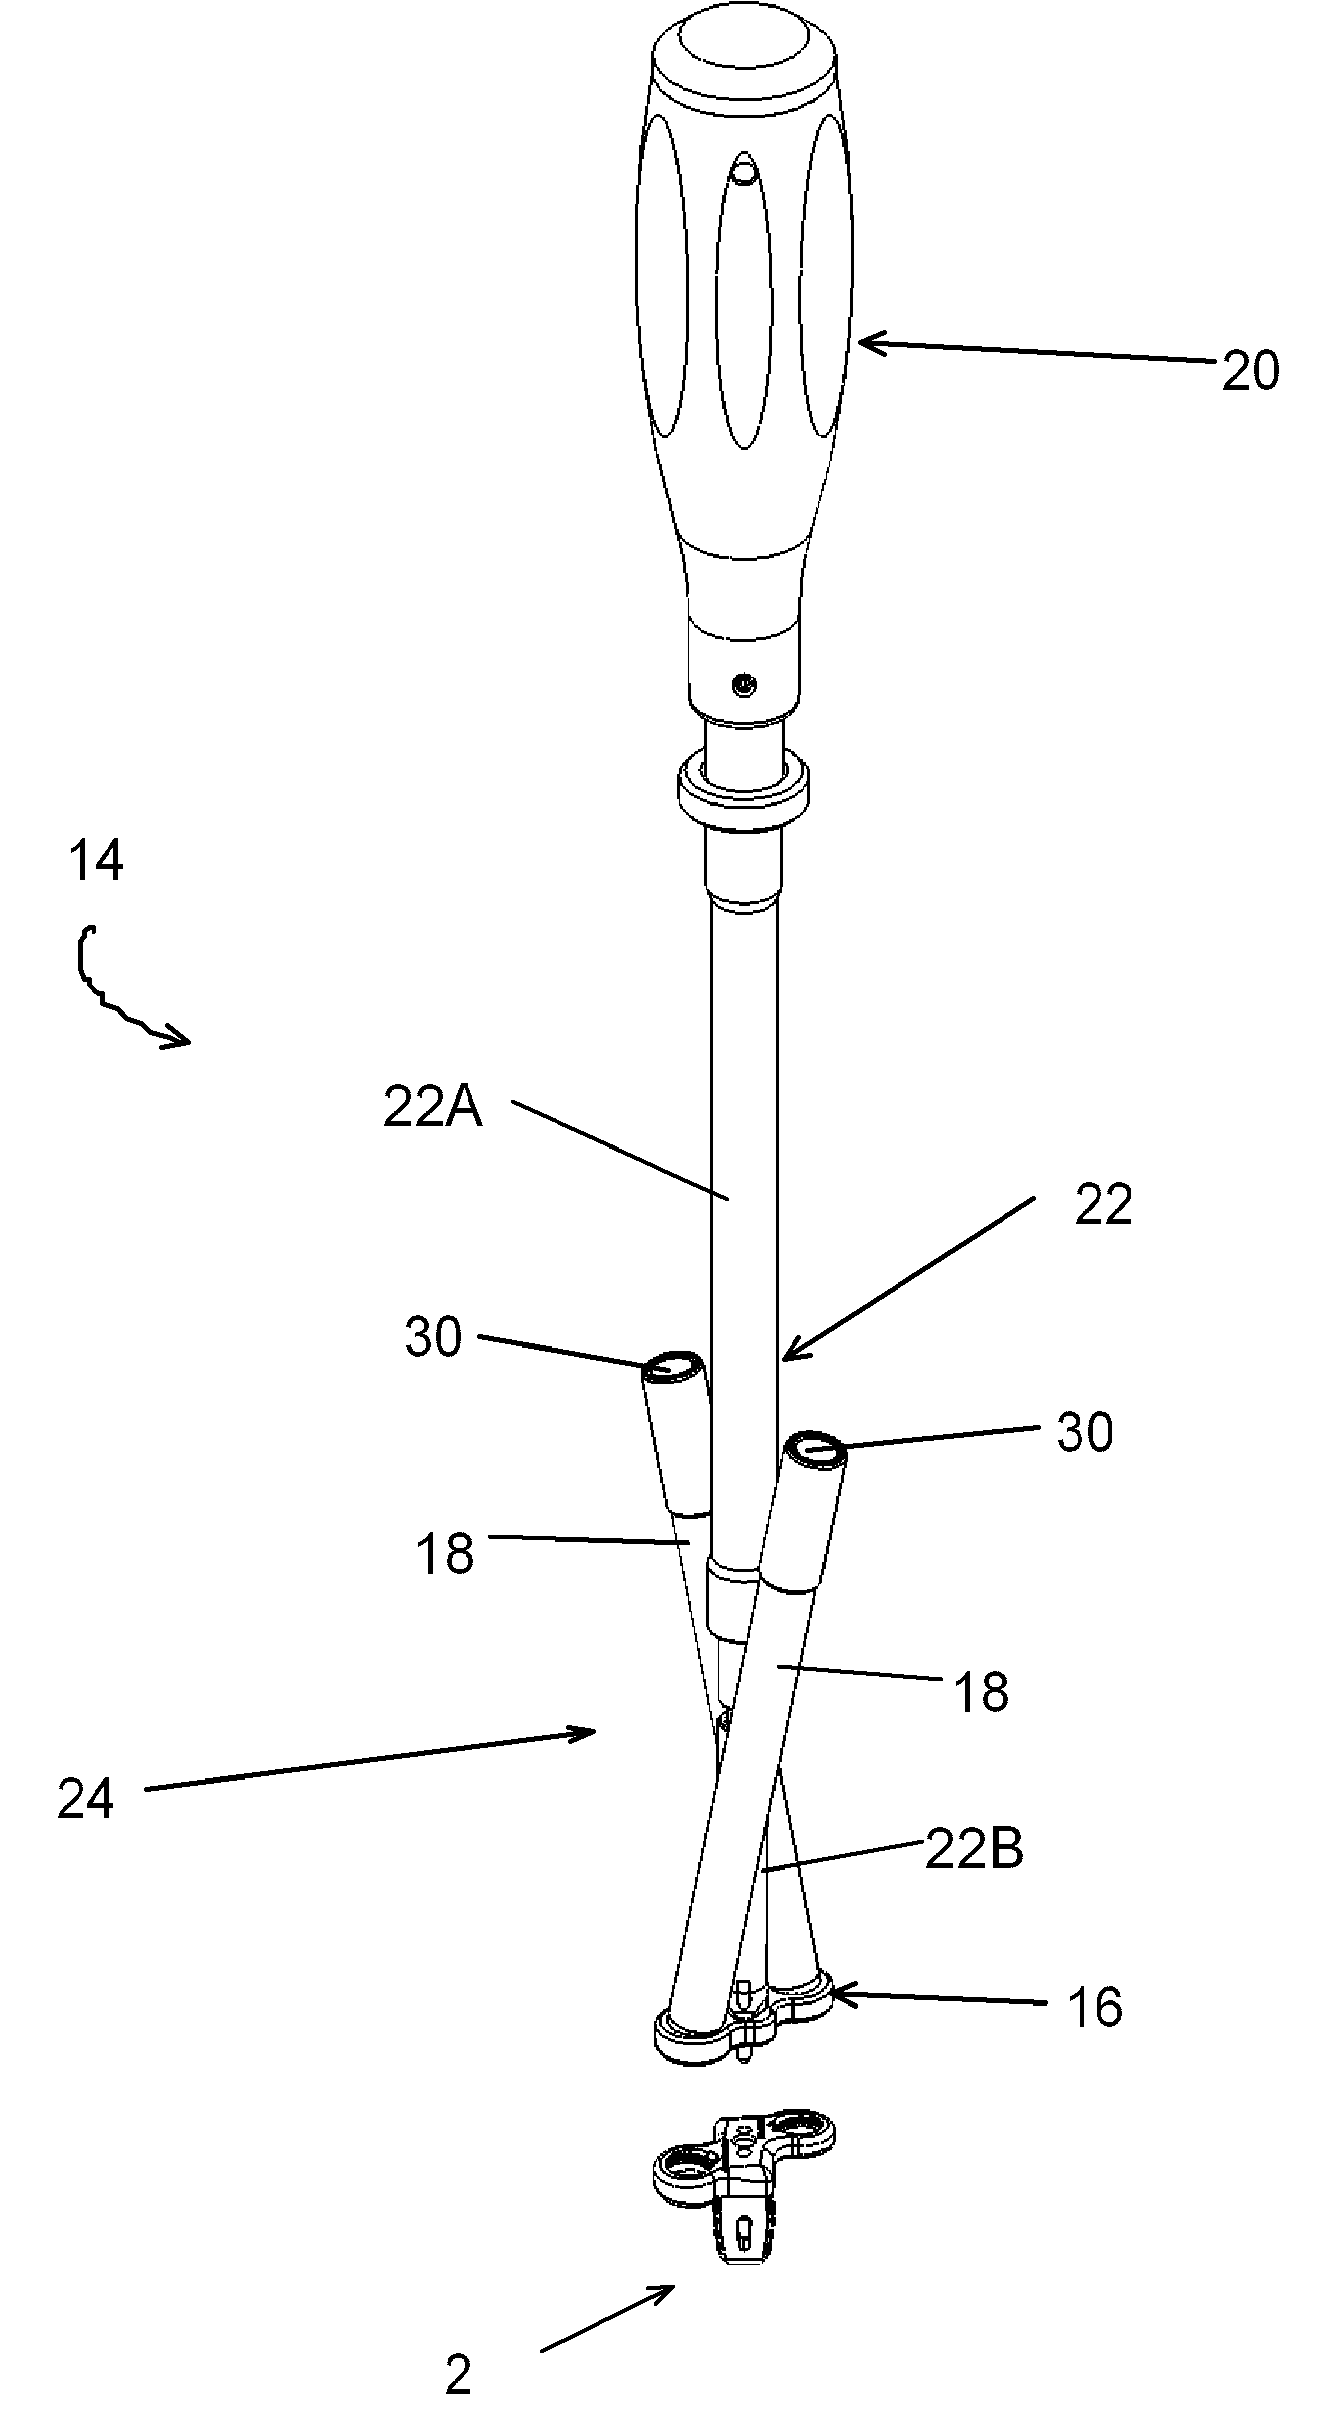 Attachable instrument guide with detachable handle